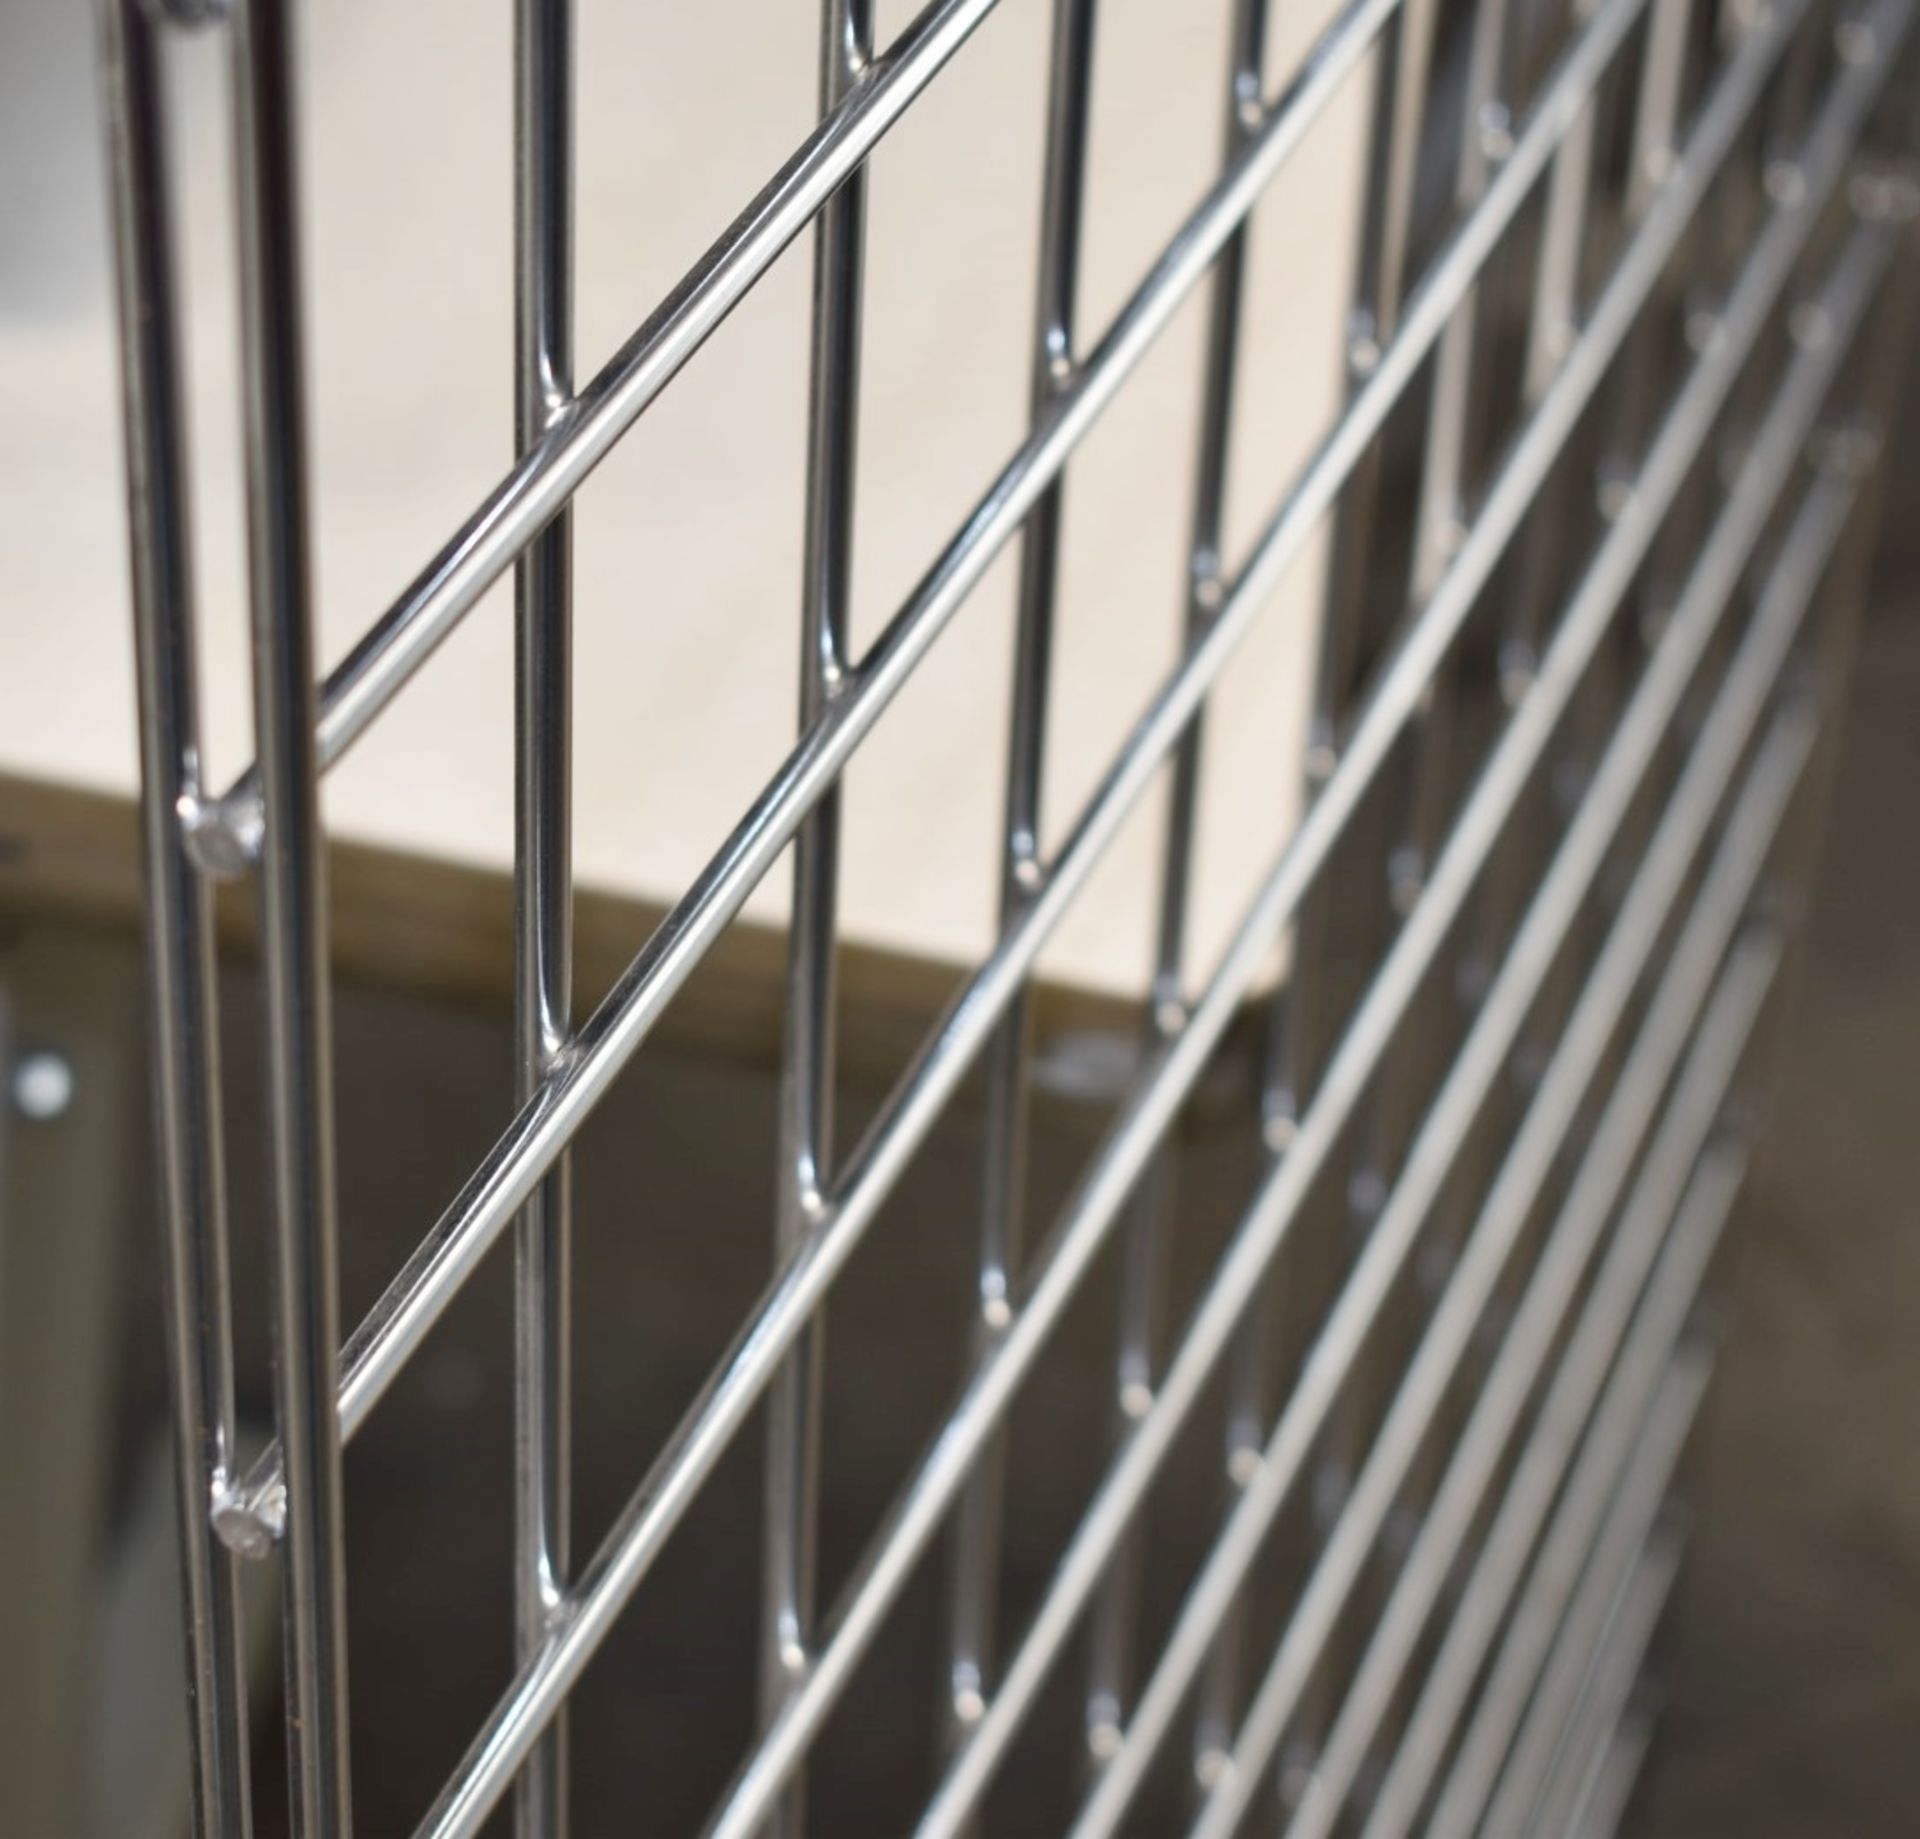 6 x Gridwall Mesh Wall Panels - Heavy Metal Construction in Chrome - Ideal For Making Security Cages - Image 6 of 7